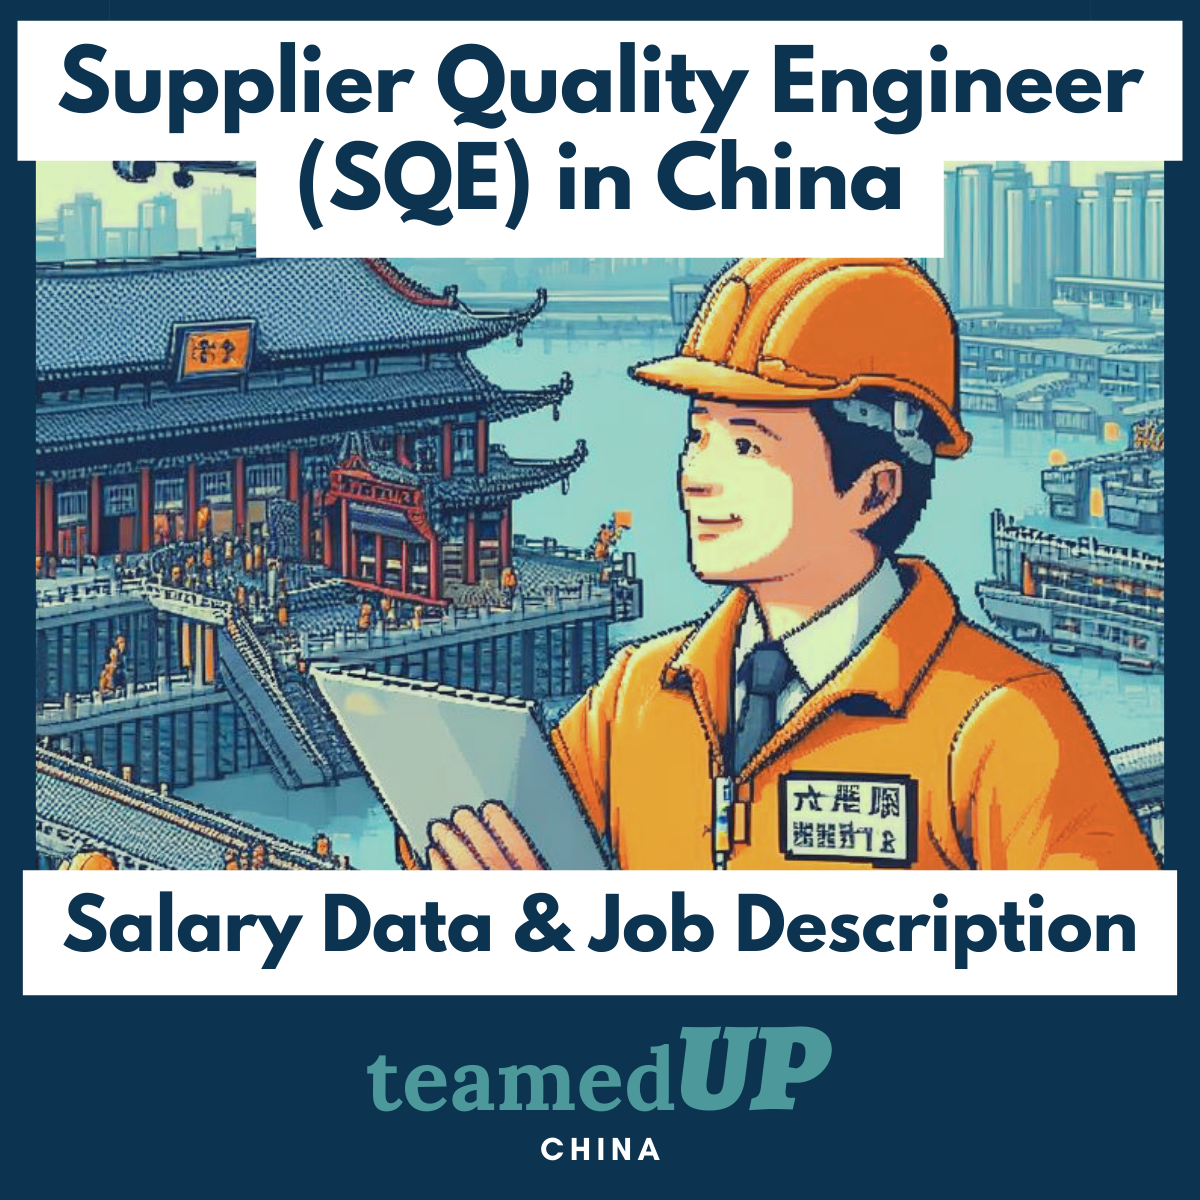 Supplier Quality Engineer in China Average Salary and JD - TeamedUp China